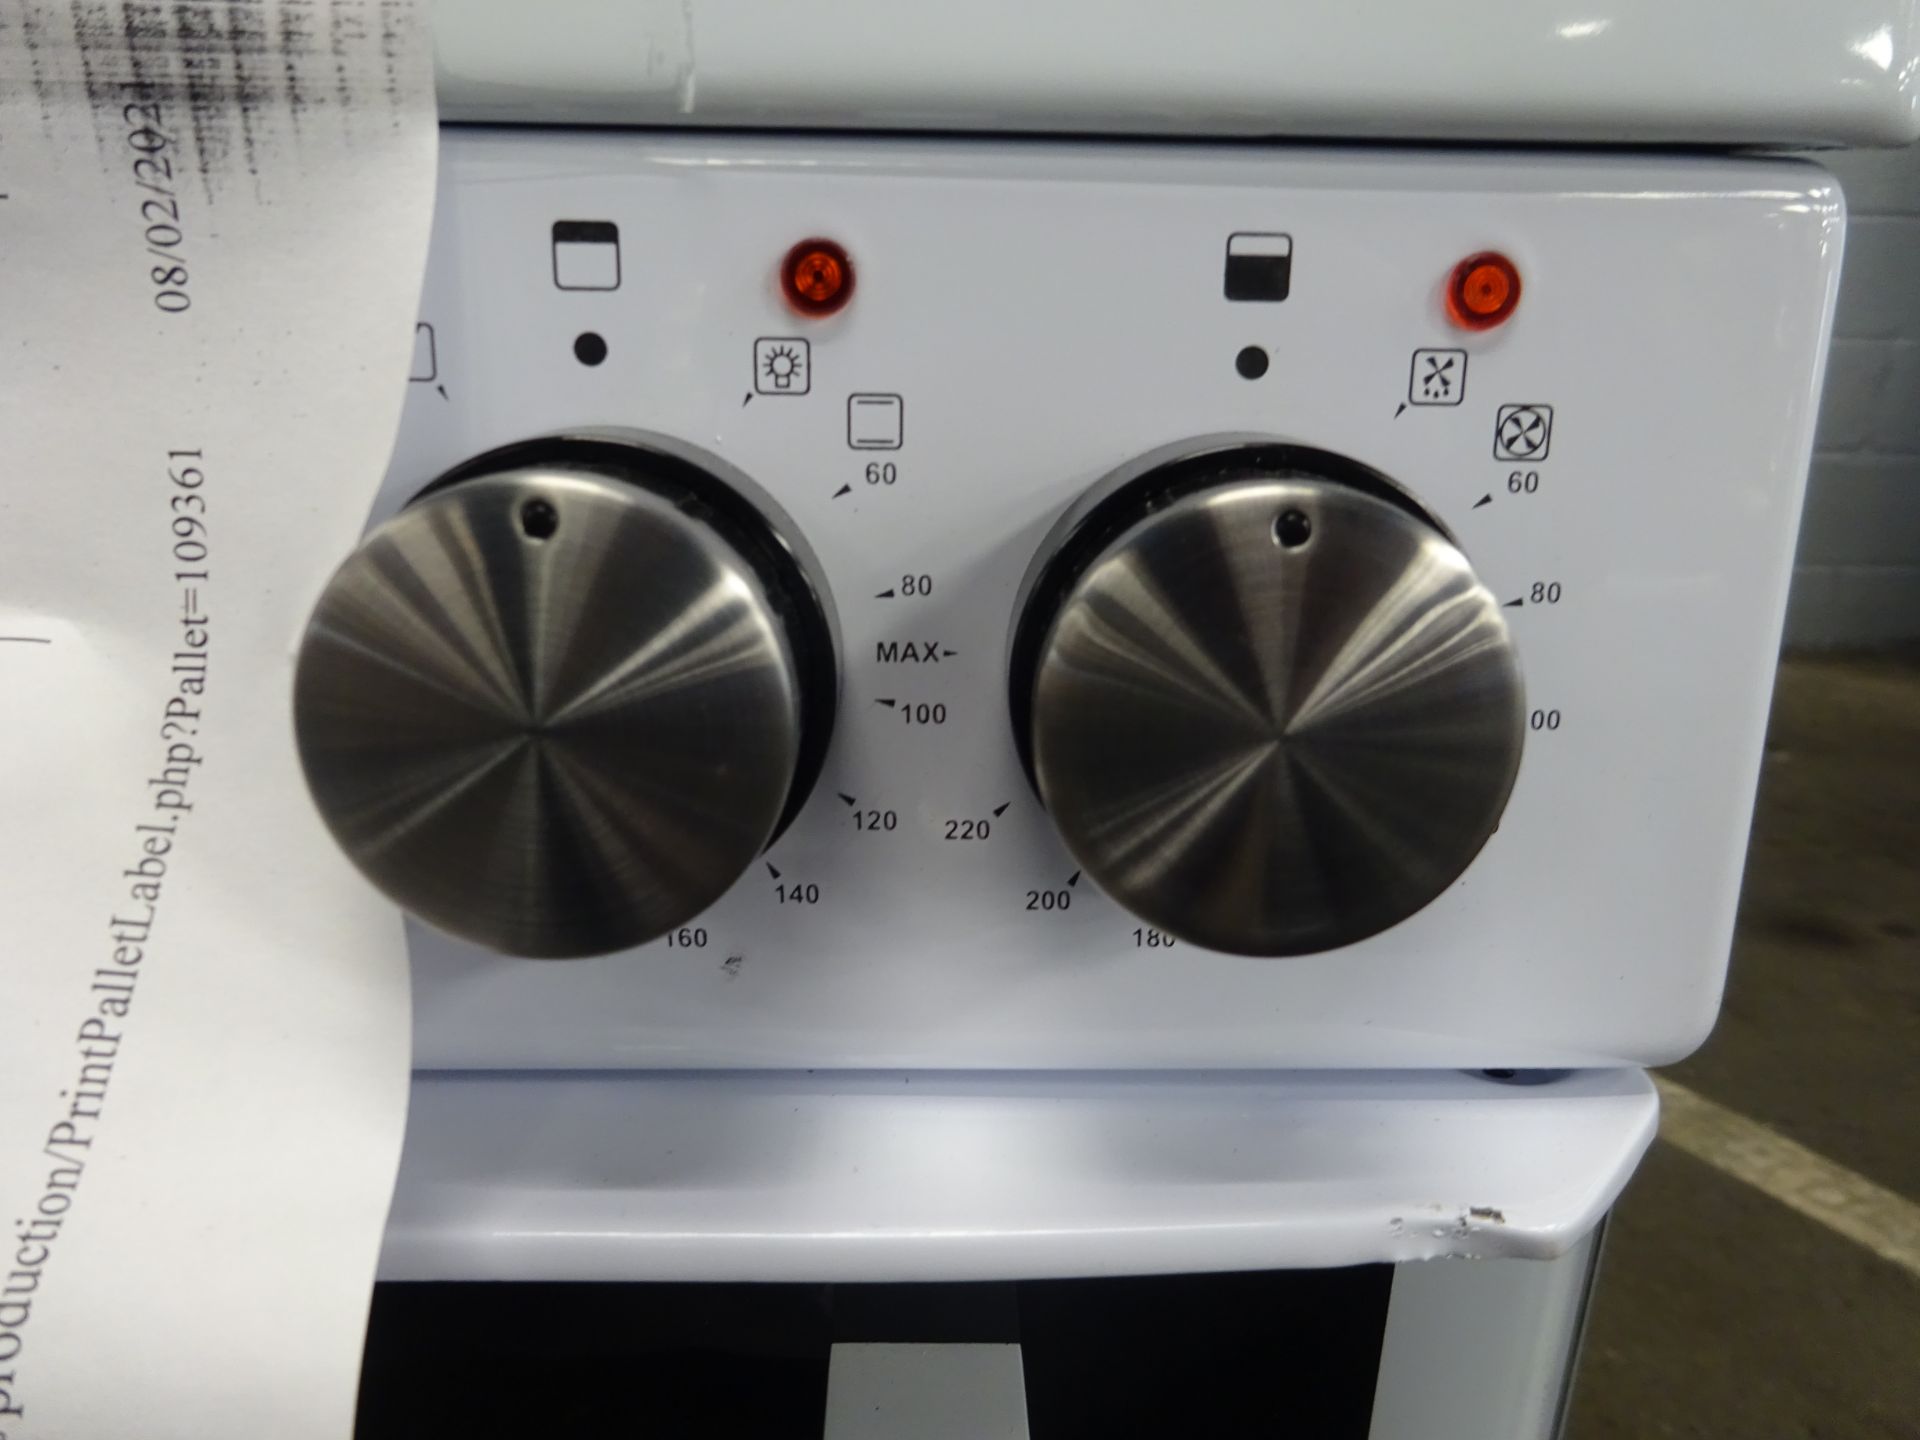 New World NWLS60DEW 60cm Double Oven Electric Cooker - White - ARGOS RRP £349.99 - Image 5 of 5